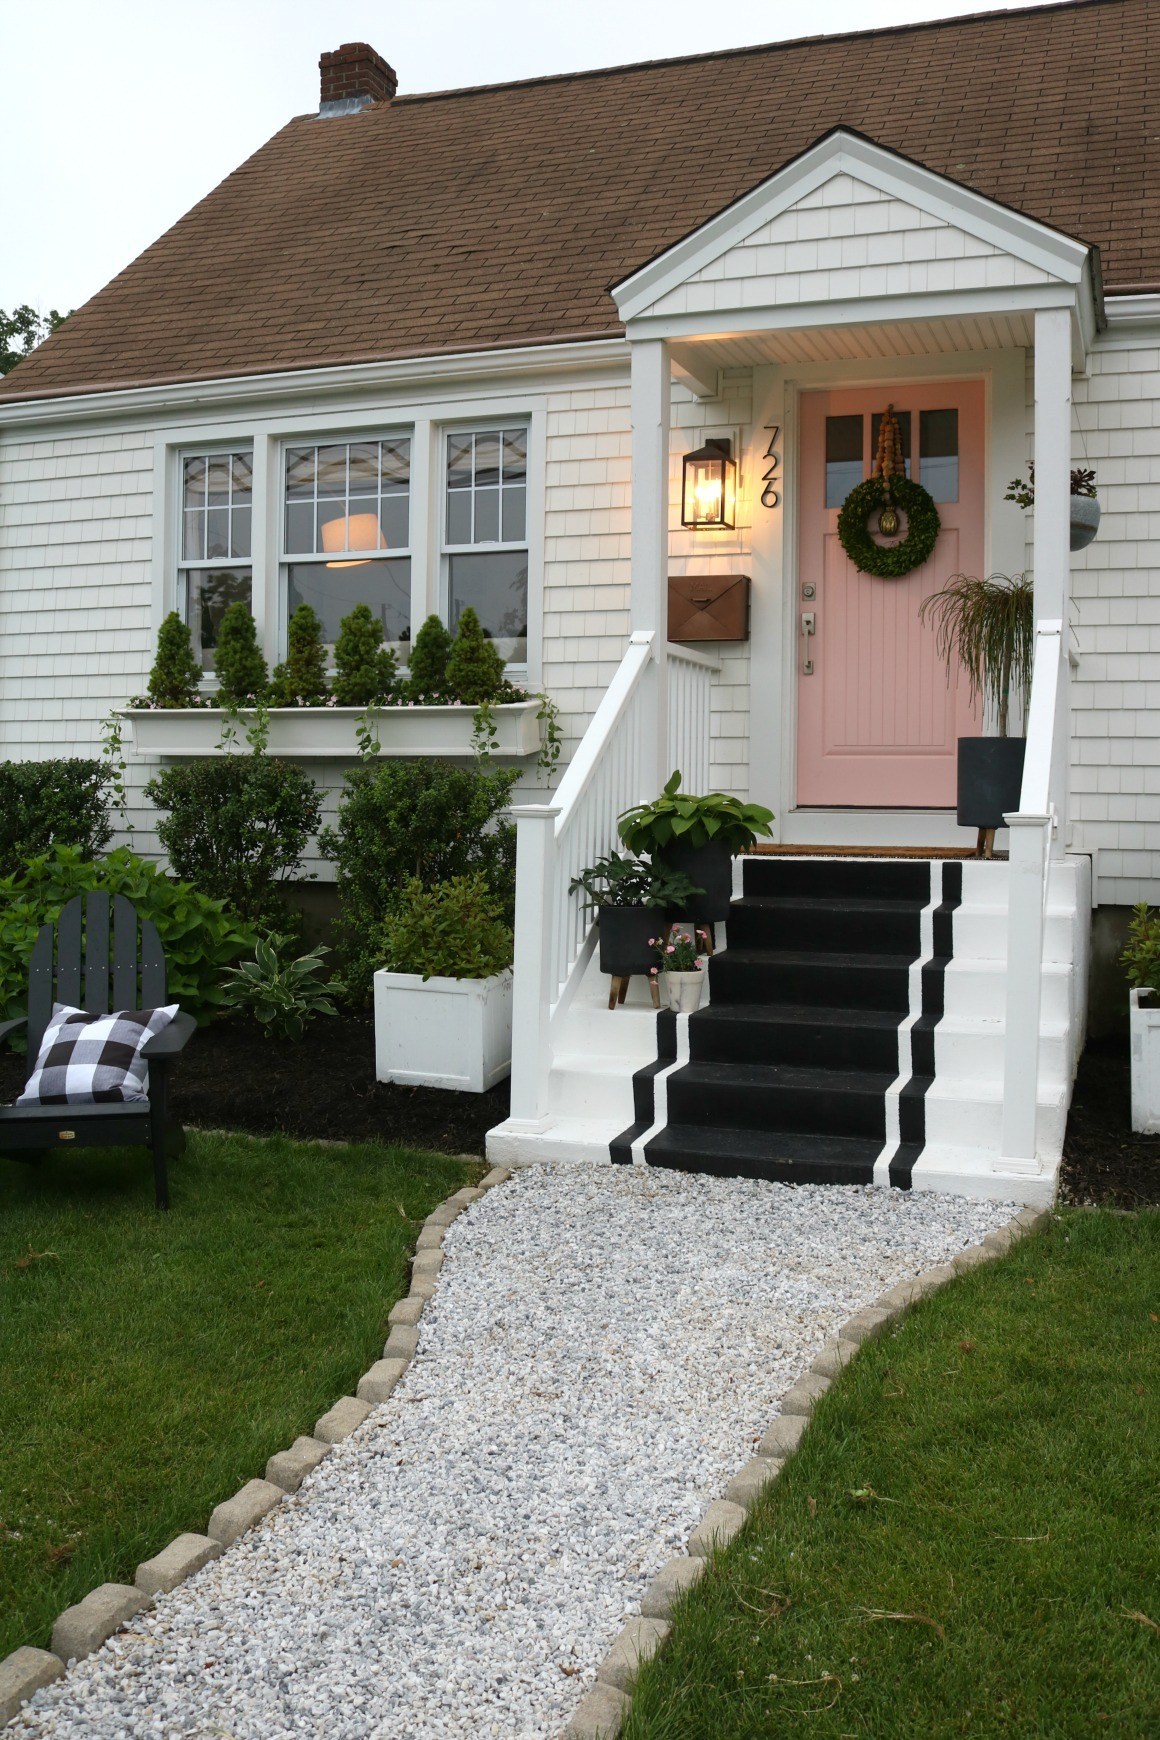 A peachy pink door adds interest to this white home.